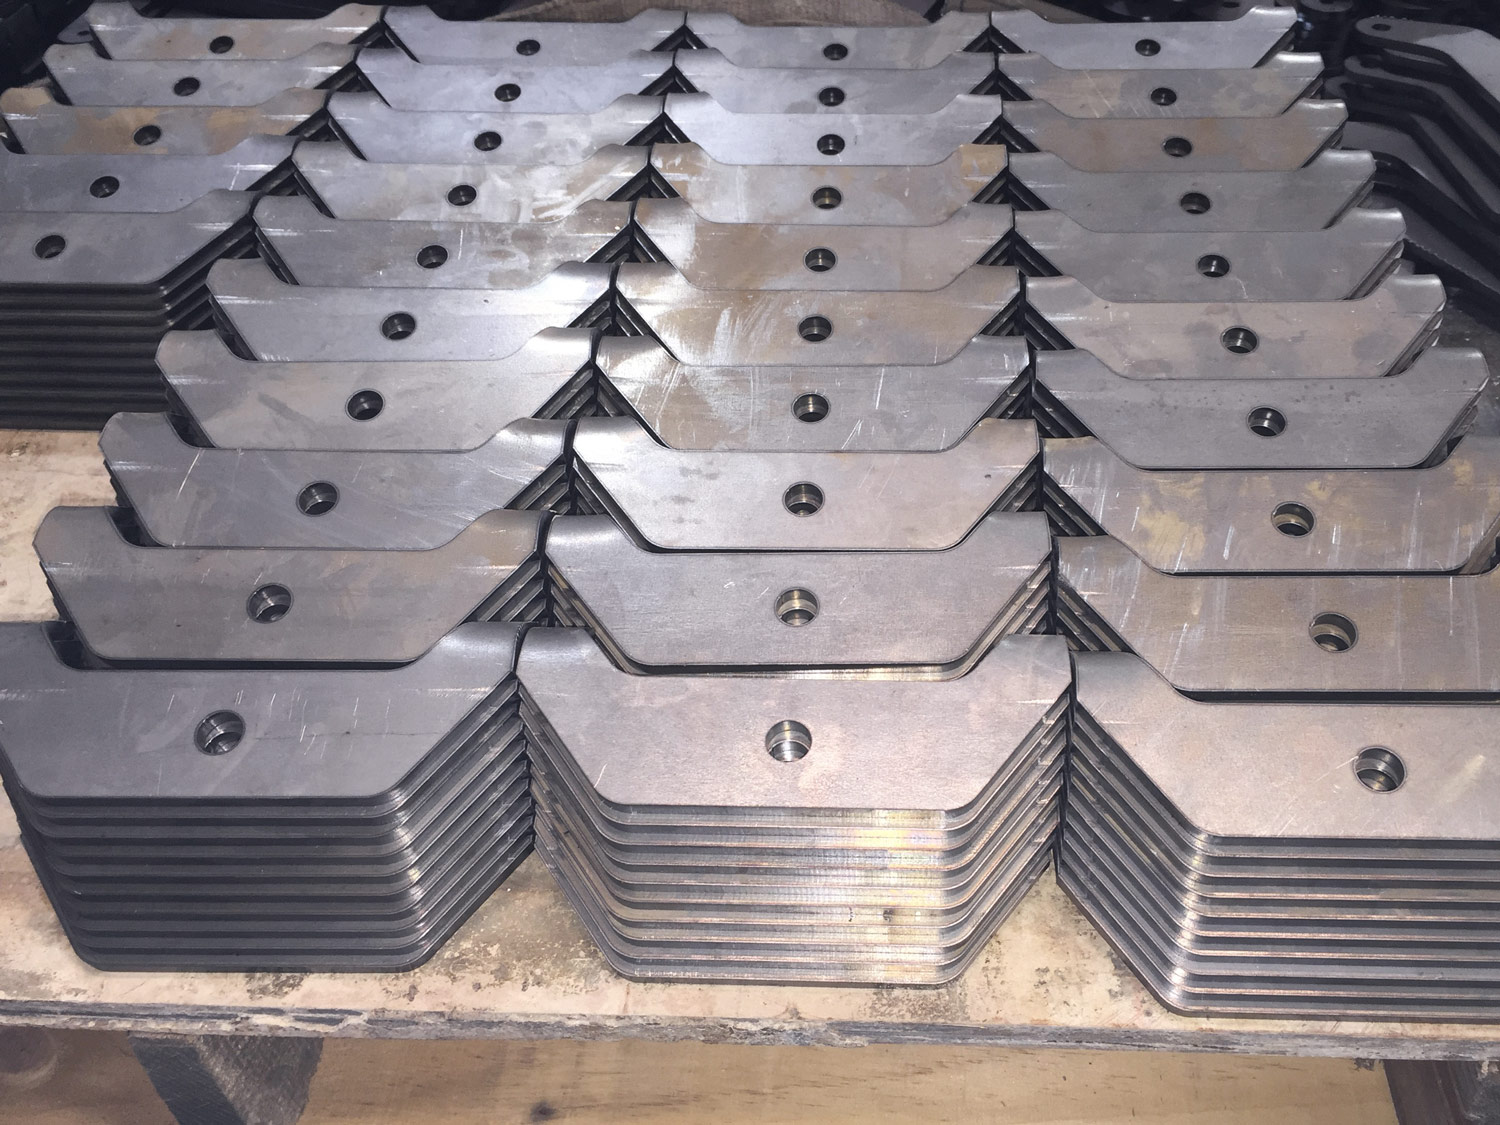 Where can I purchase sheet metal work in the UK